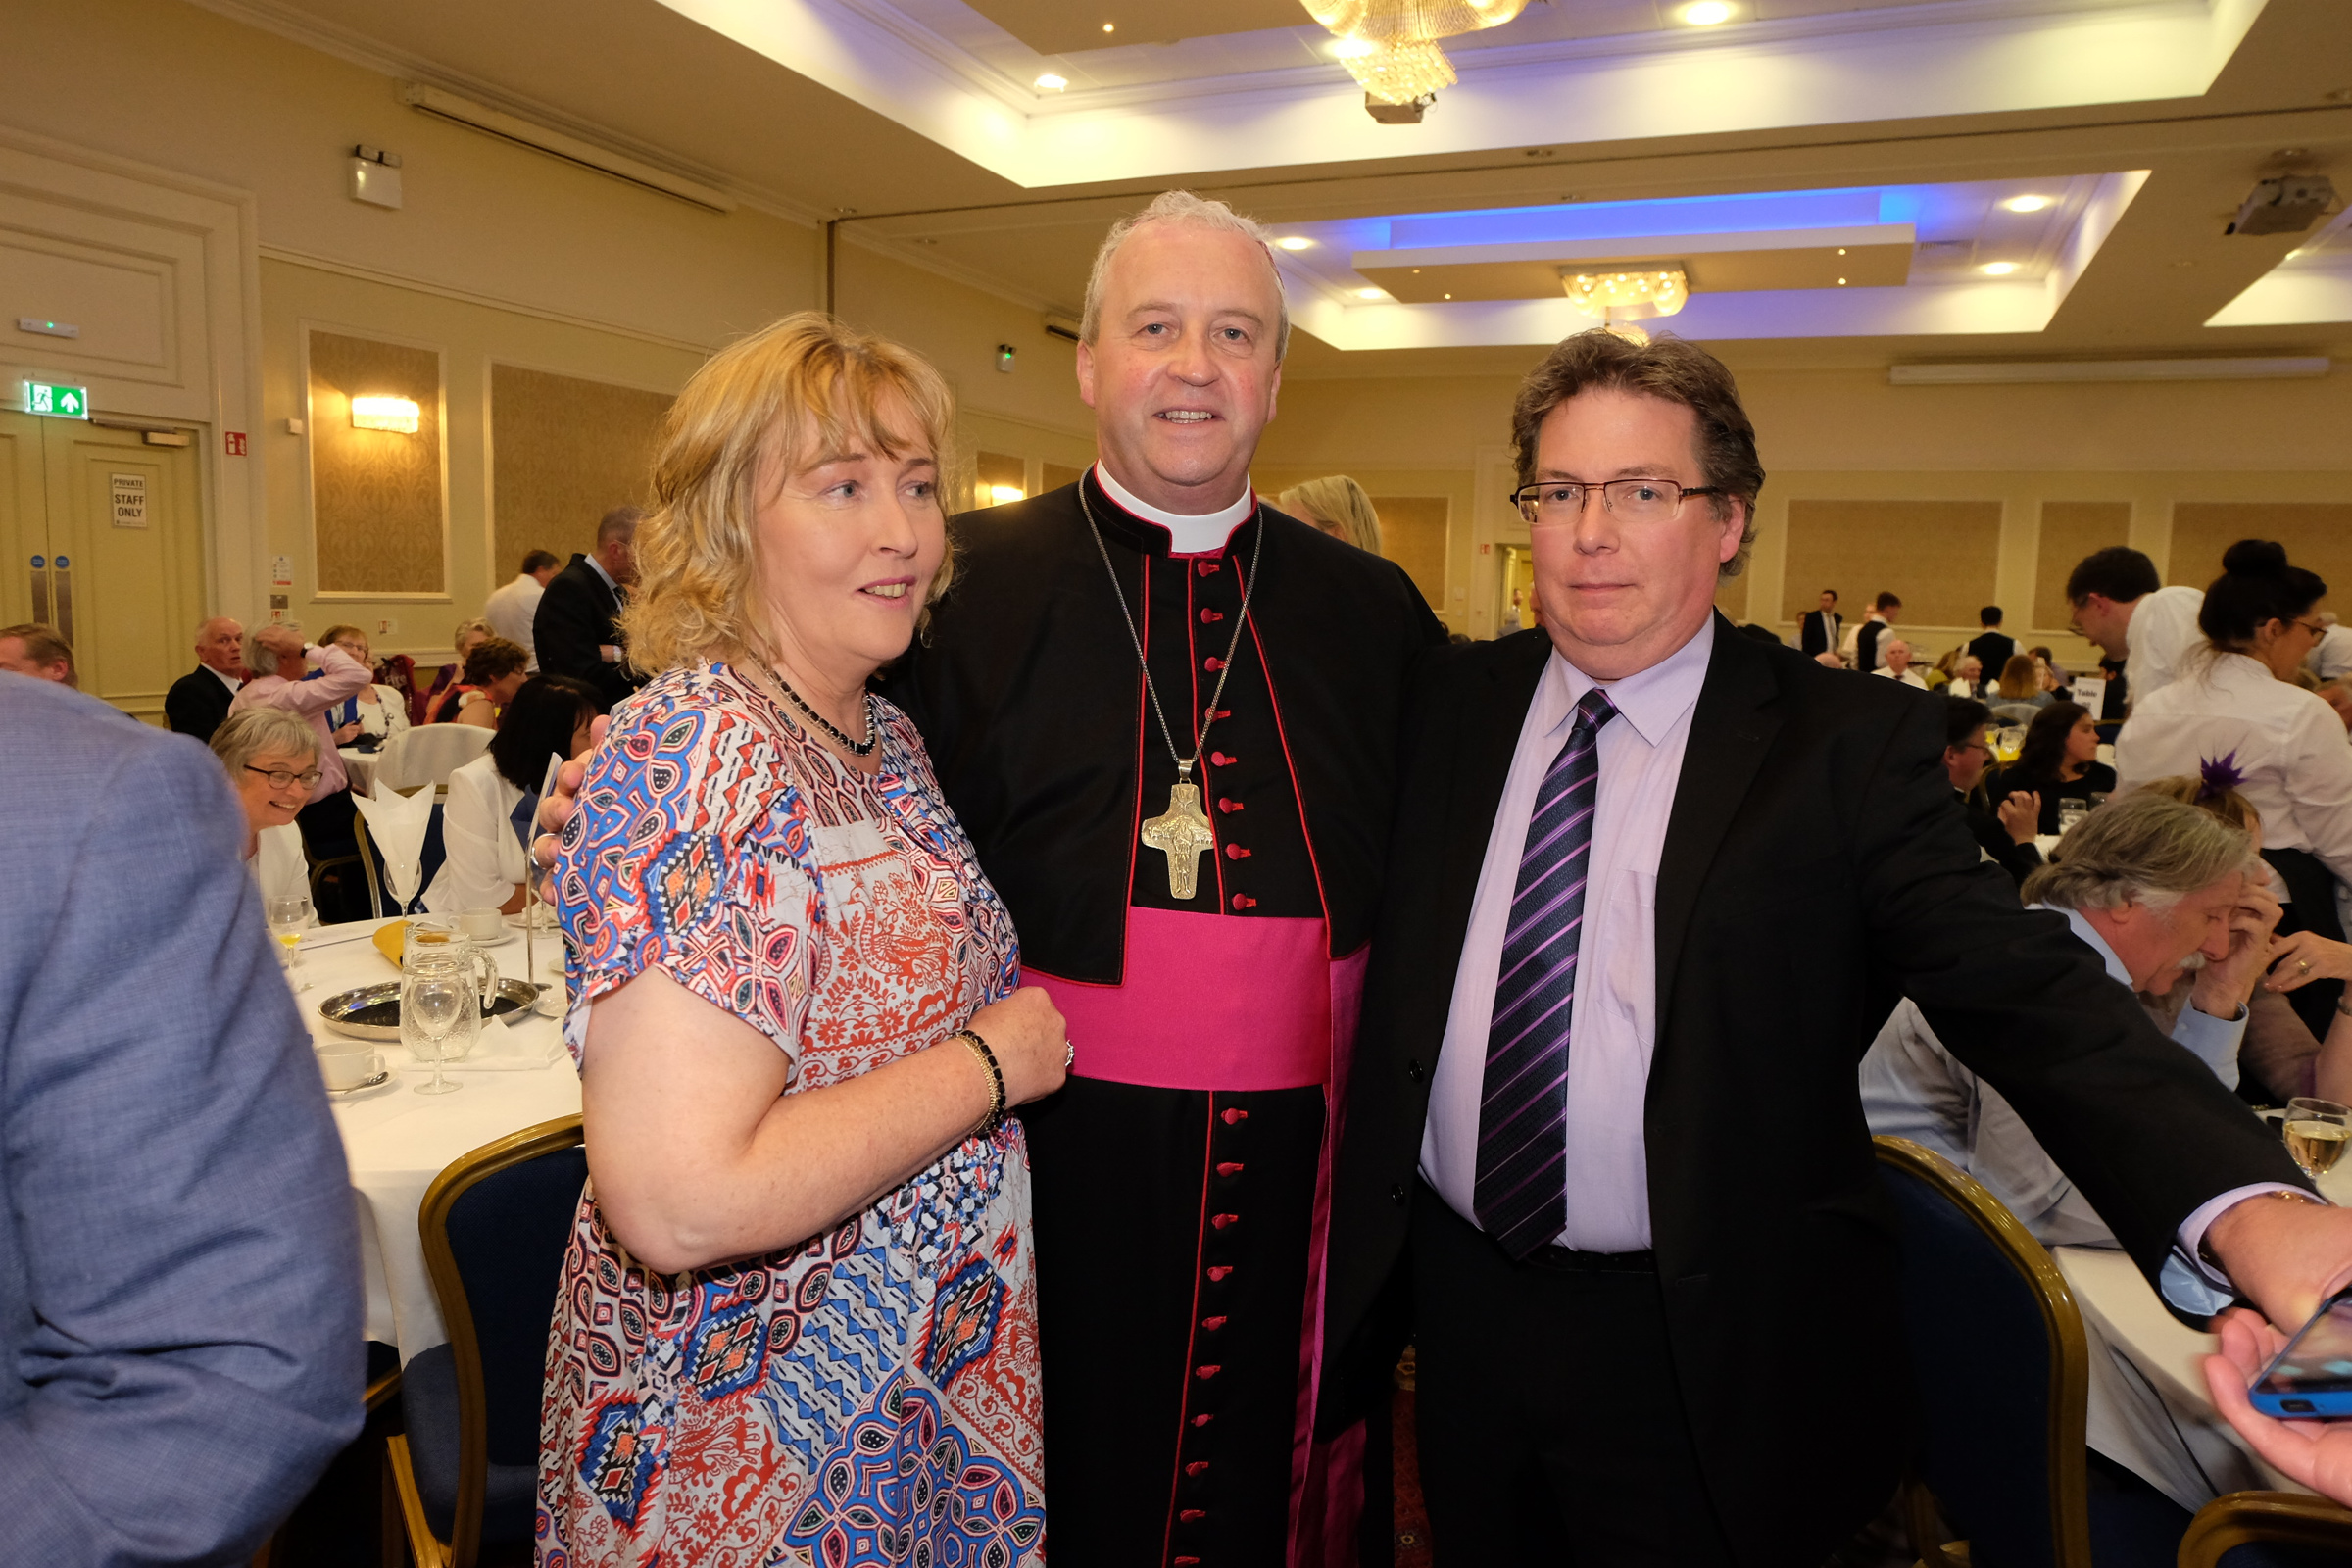 Geraldine and Alexis Sheridan with the new Bishop Michael Router at a celebration dinner following the Bishop's Ordination Armagh City Hotel, Armagh,  21 July 2019Credit: LiamMcArdle.com